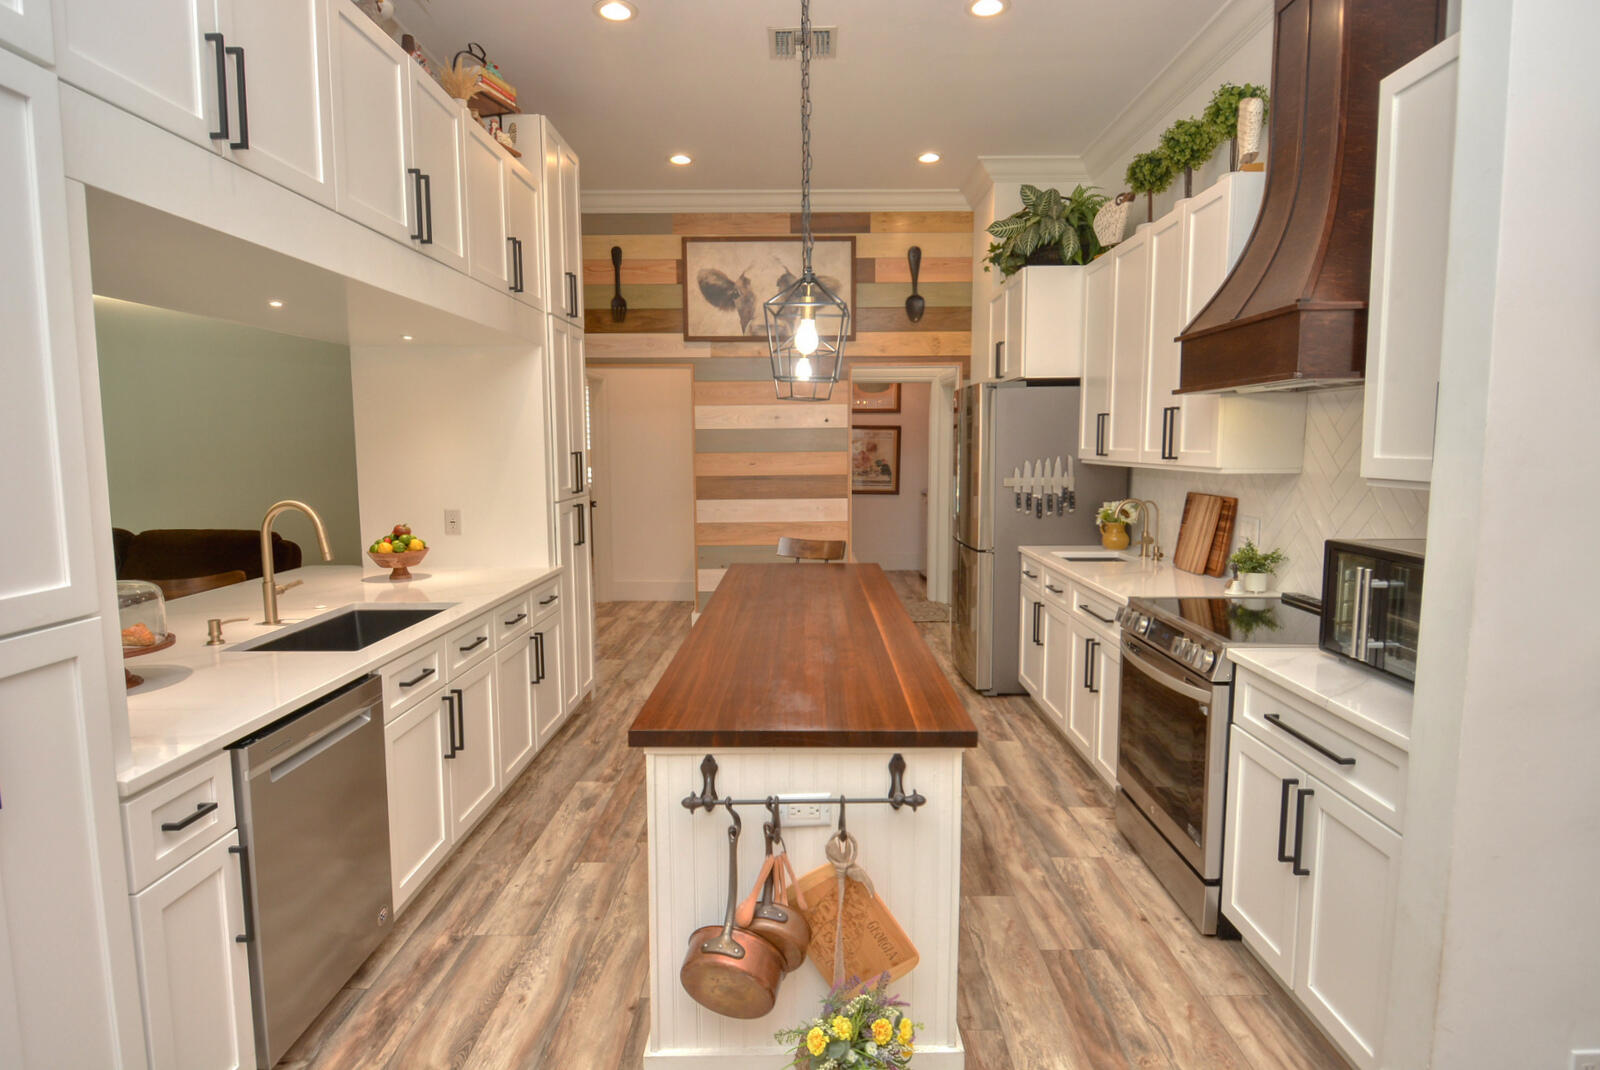 a kitchen with stainless steel appliances a stove a sink dishwasher a refrigerator white cabinets and wooden floor